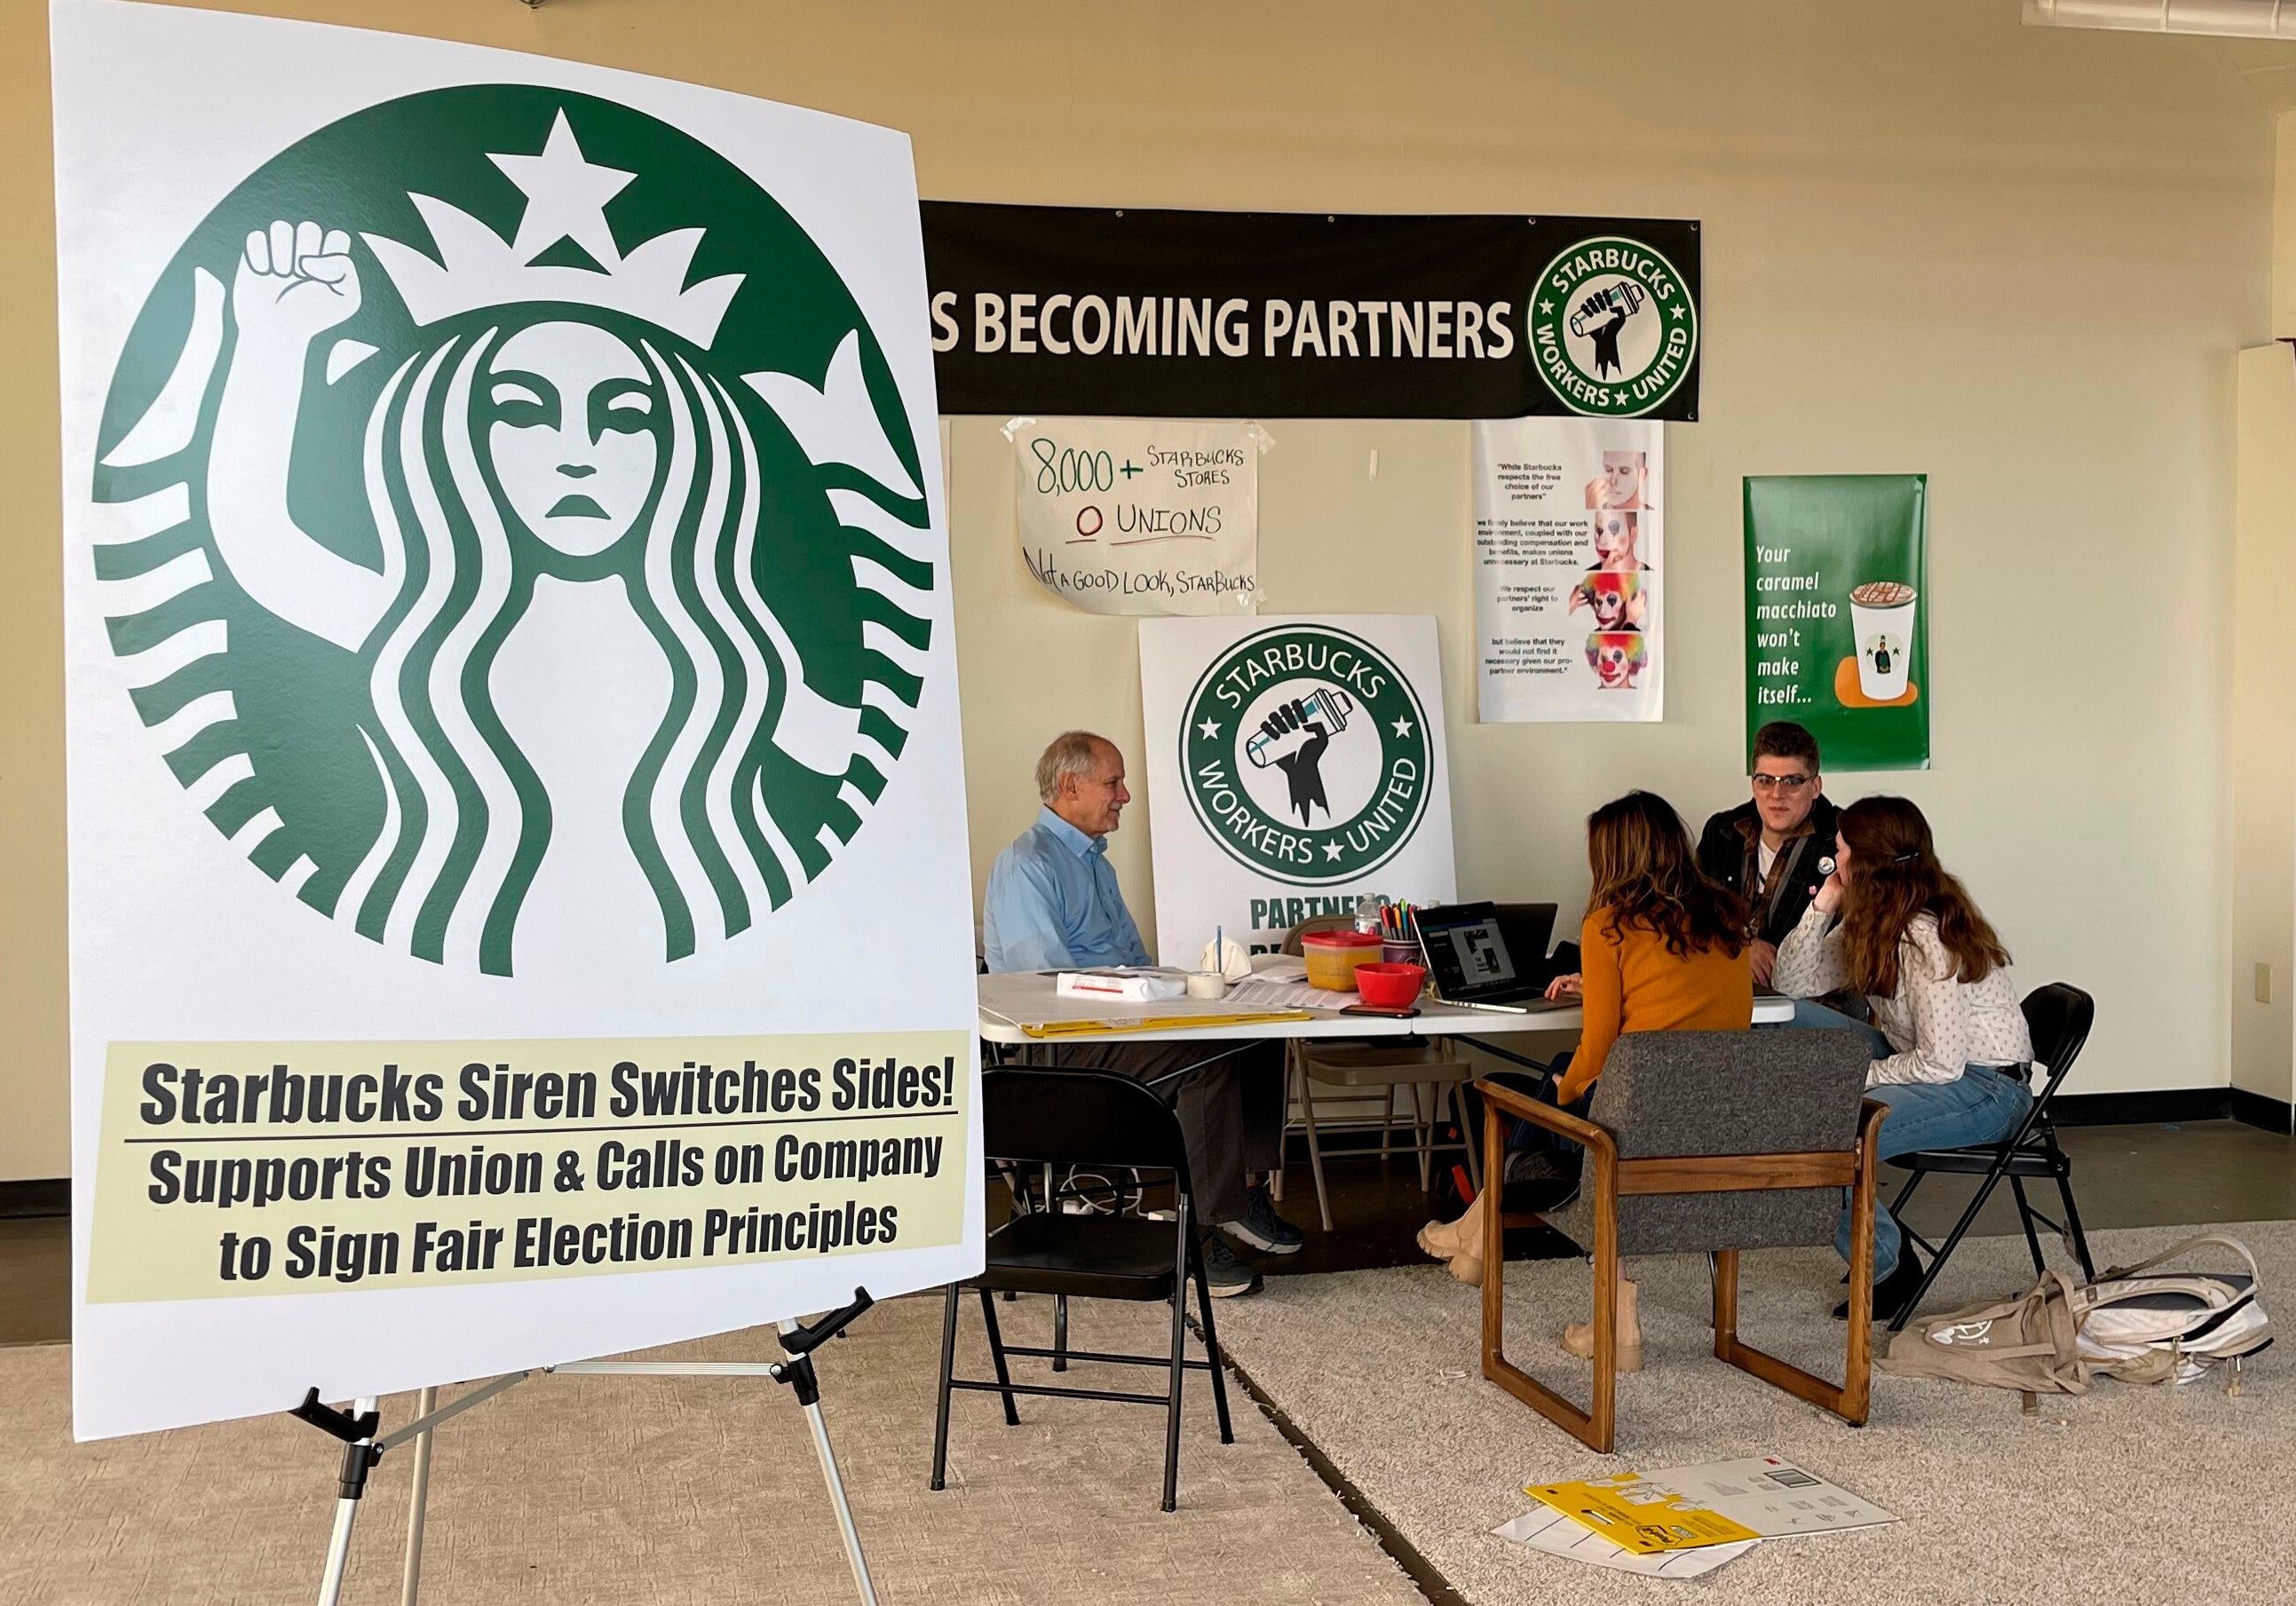 Richard Bensinger, left, who is advising unionization efforts, along with baristas Casey Moore, right, Brian Murray, second from left, and Jaz Brisack, second from right, discuss their efforts to unionize three Buffalo-area stores, inside the movements headquarters on Thursday, Oct. 28, 2021 in Buffalo, NY.